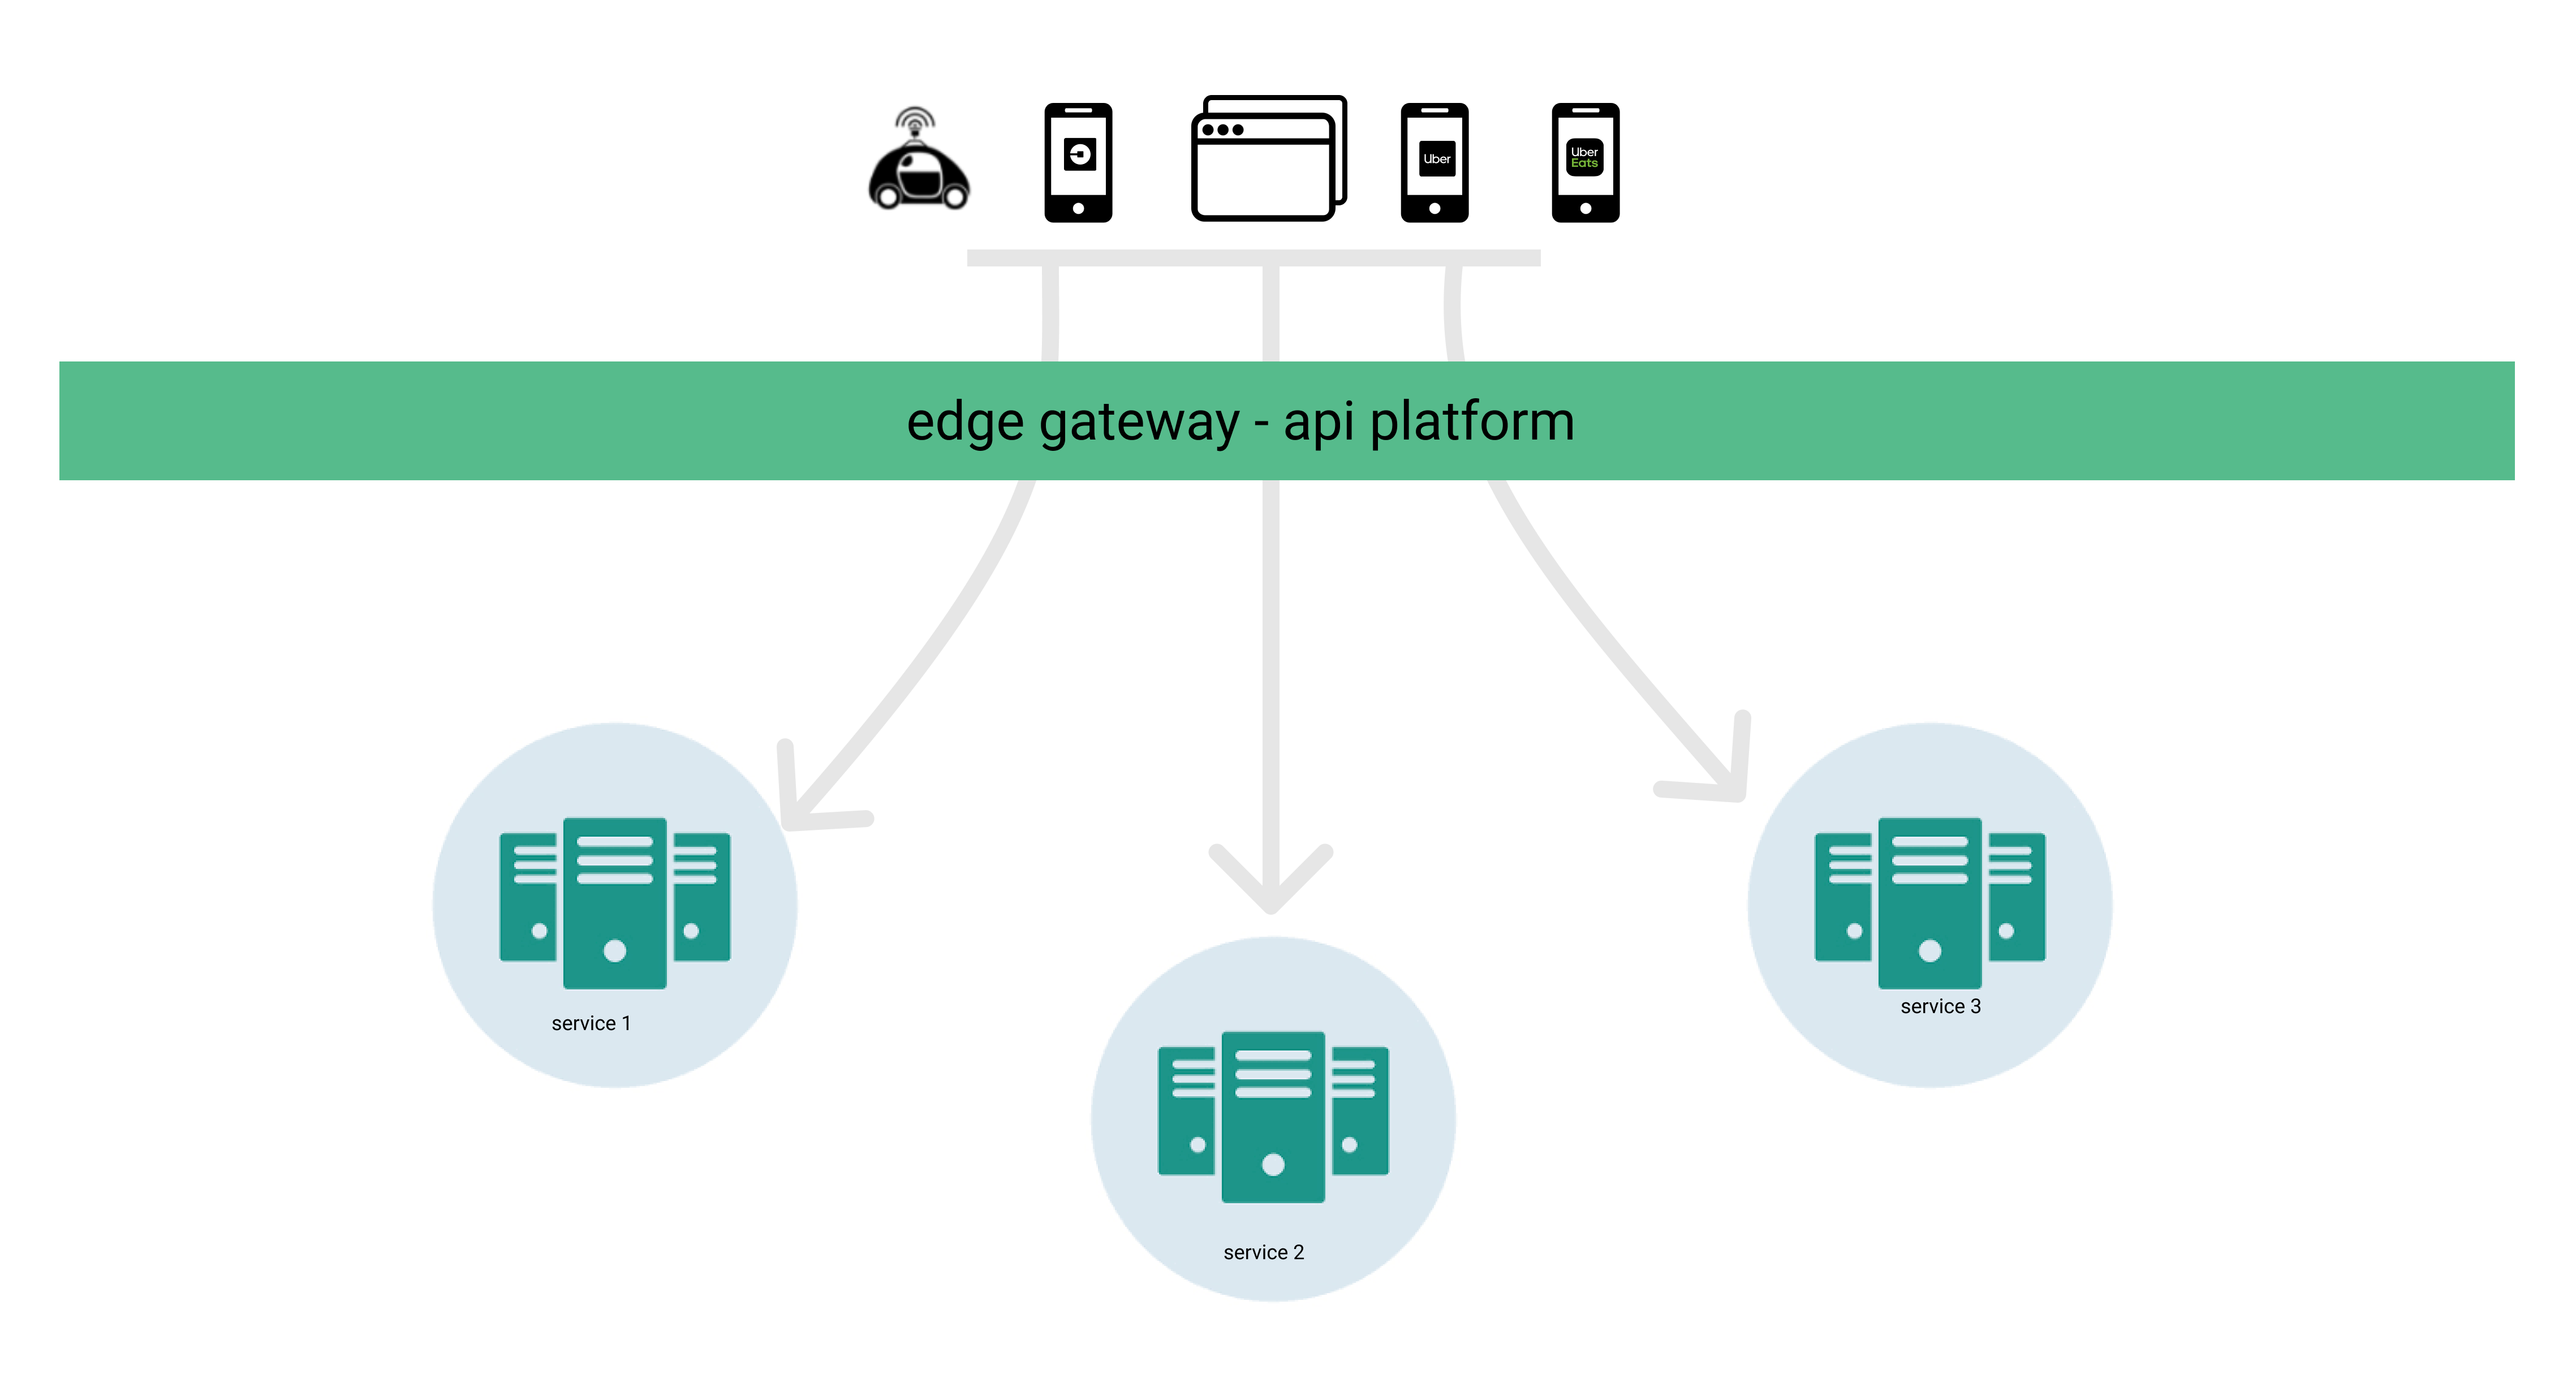 API gateways are an integral part of microservices architecture in recent years. An API gateway provides a single point of entry for all our apps and 